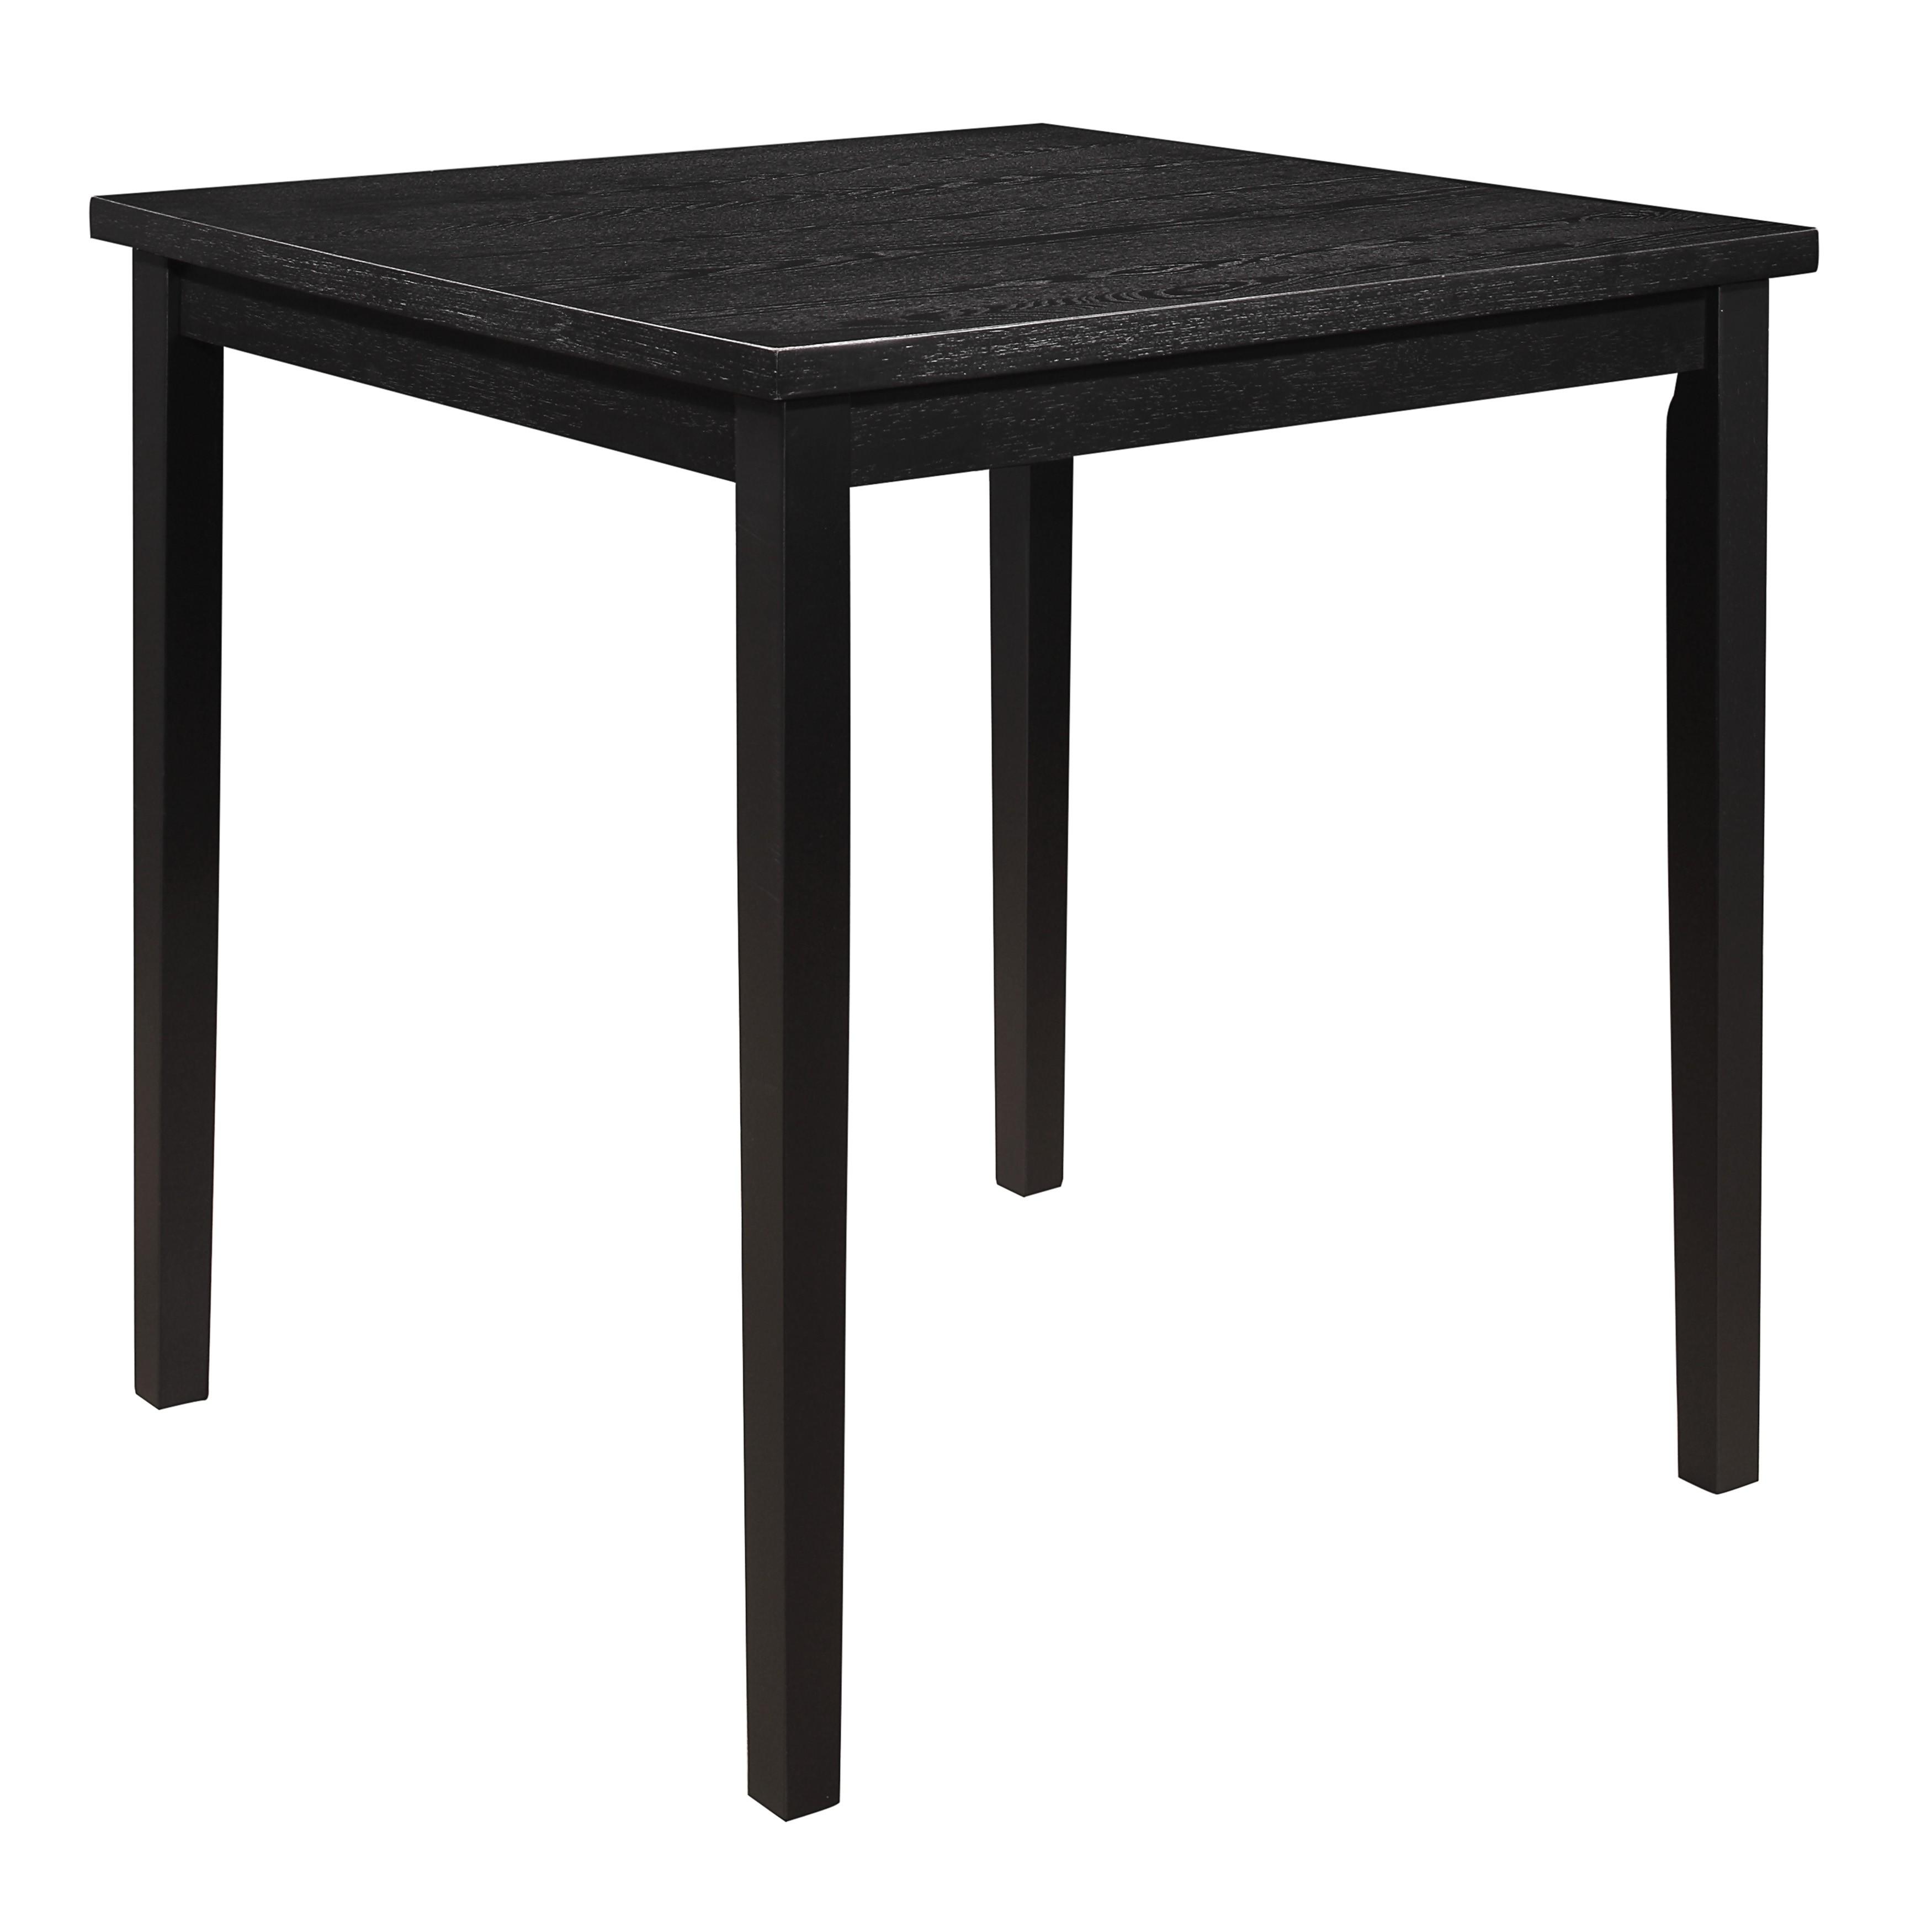 Transitional Counter Height Table 5801-36 Adina 5801-36 in Black 